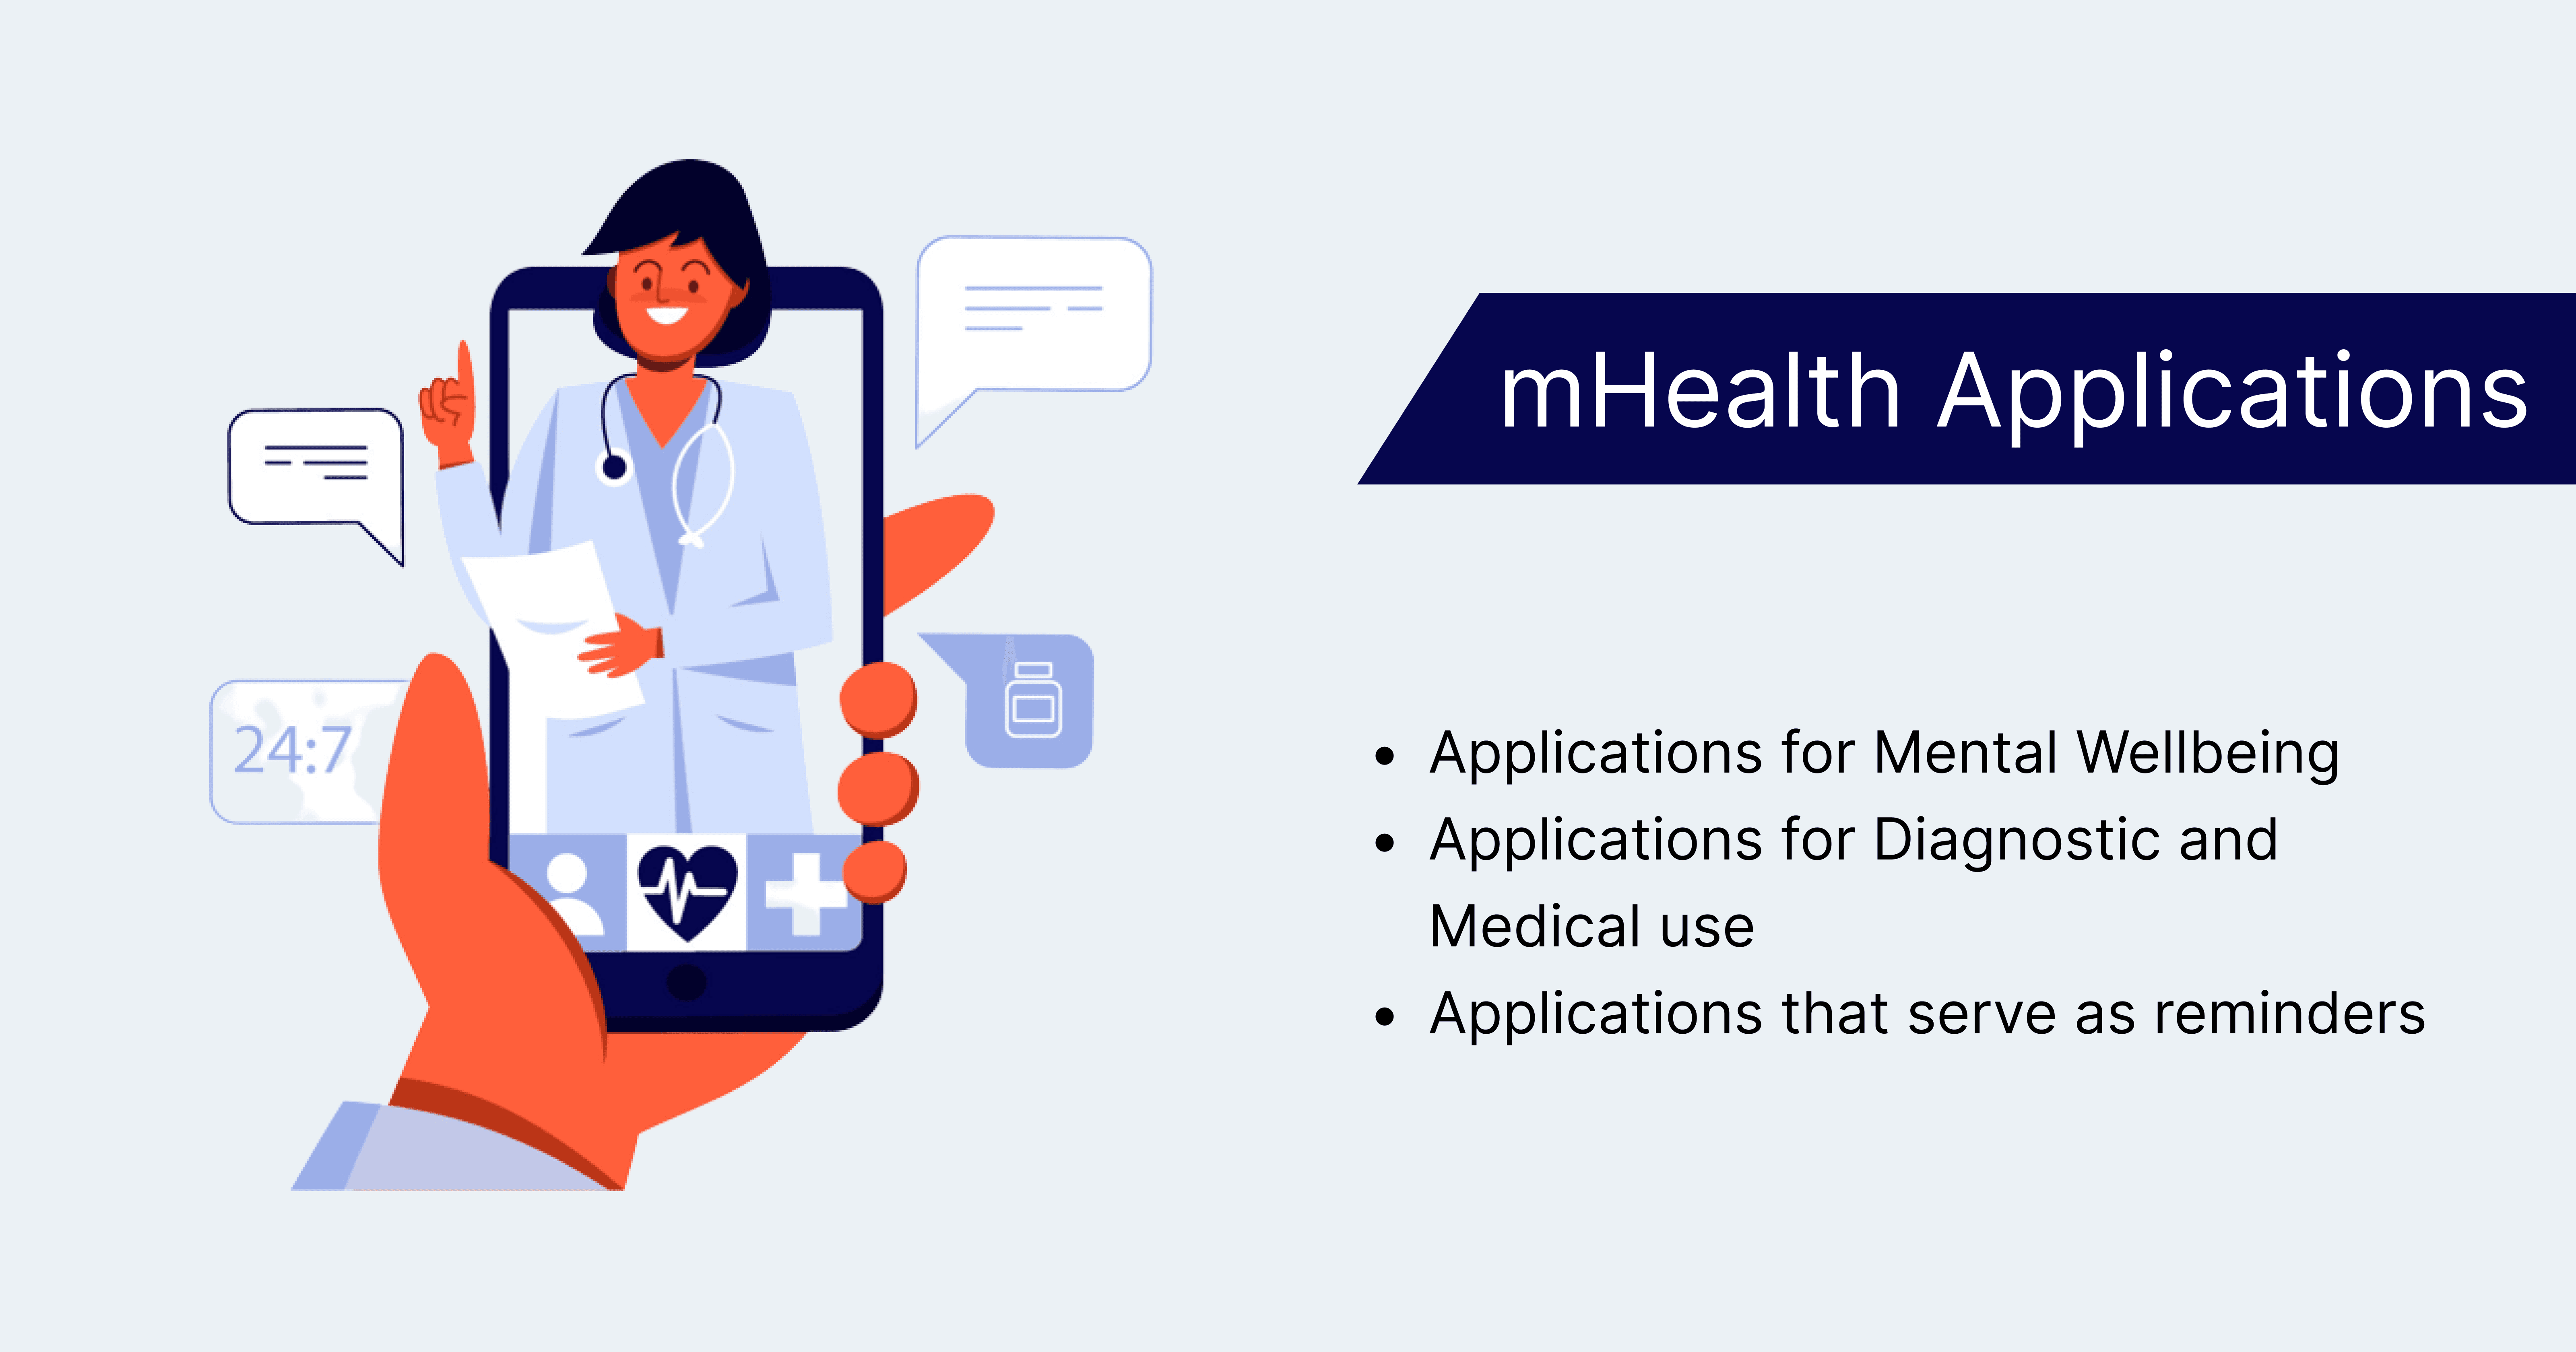 mHealth (Mobile Health) applications and everything about them